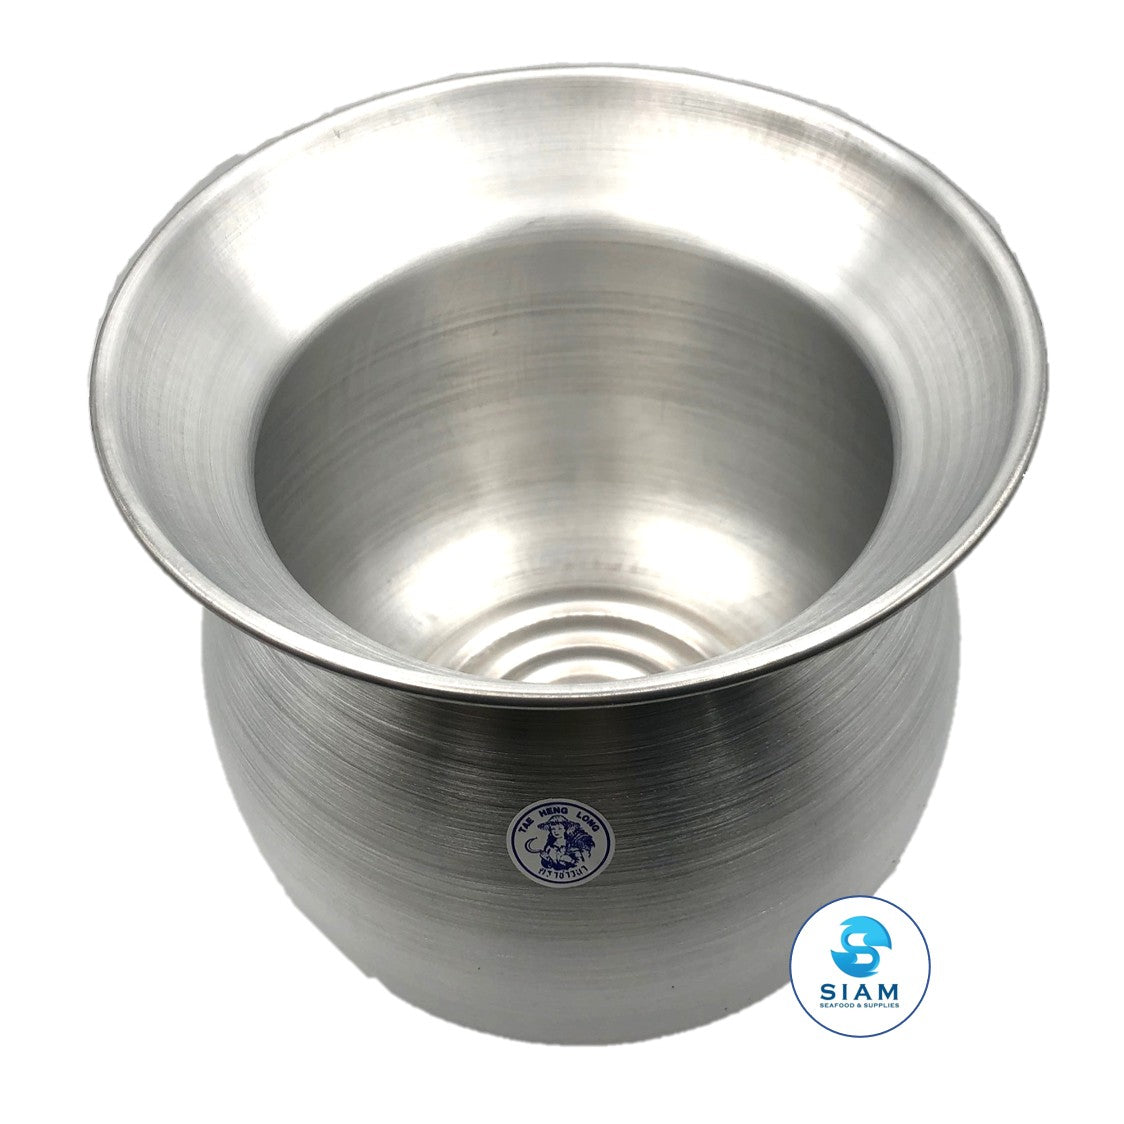 PANWA Sticky Rice Aluminum Cook Pot from Thailand - Genuine Replacement Pot  for Traditional Steamer Crock, Family Size 8.67 Inch Standard Diameter (22